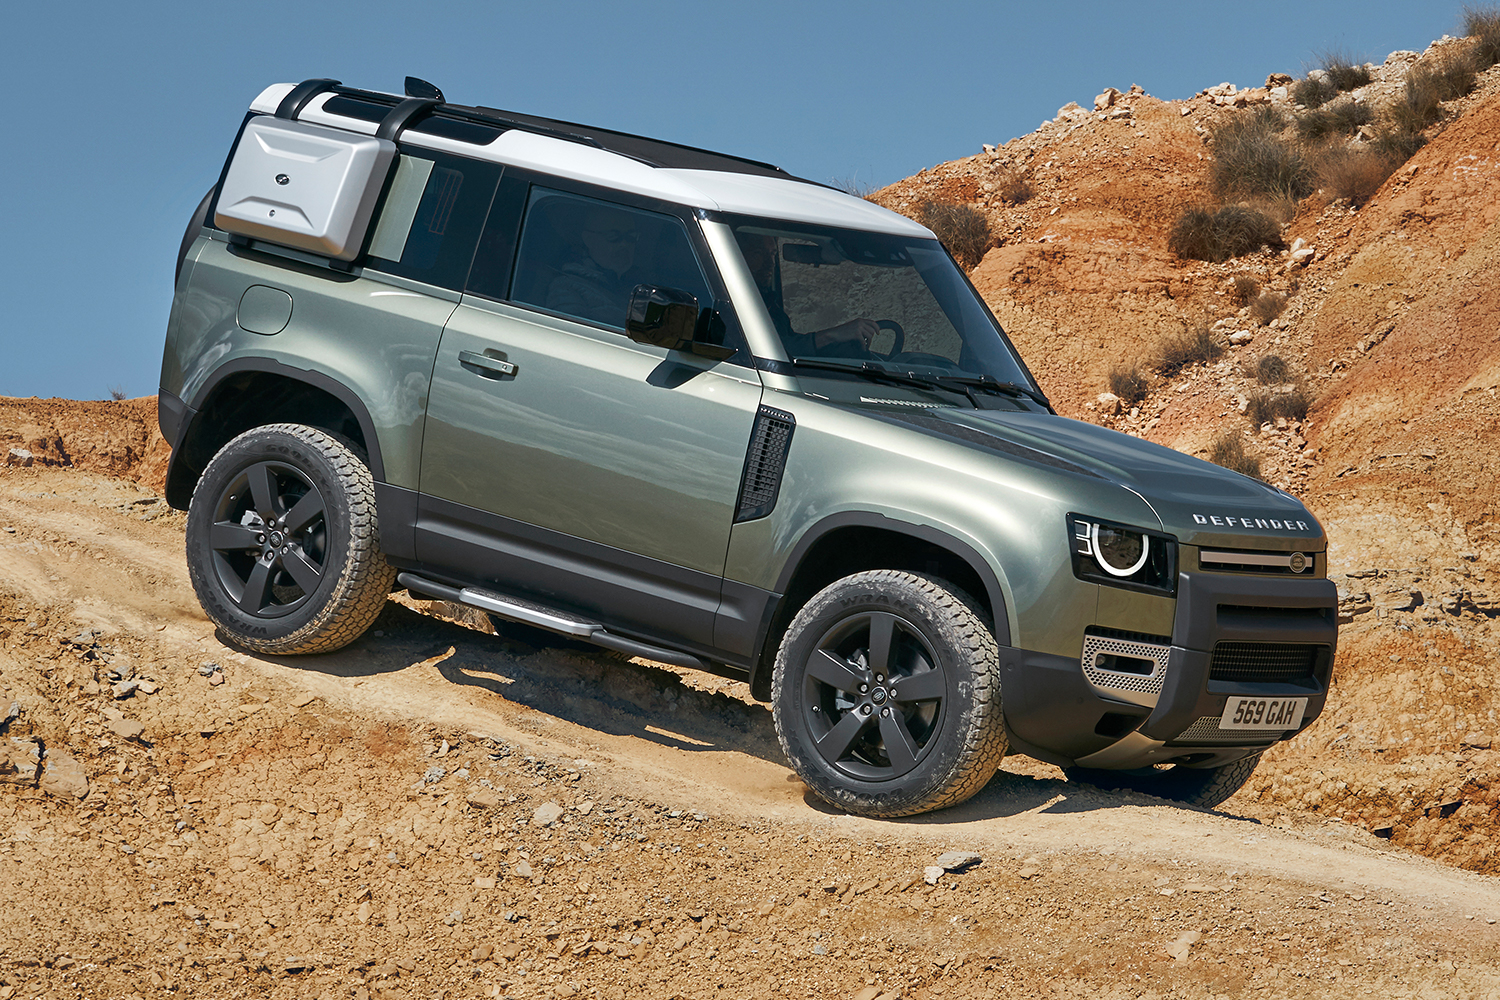 Why People Hate the Redesigned 2020 Land Rover Defender InsideHook